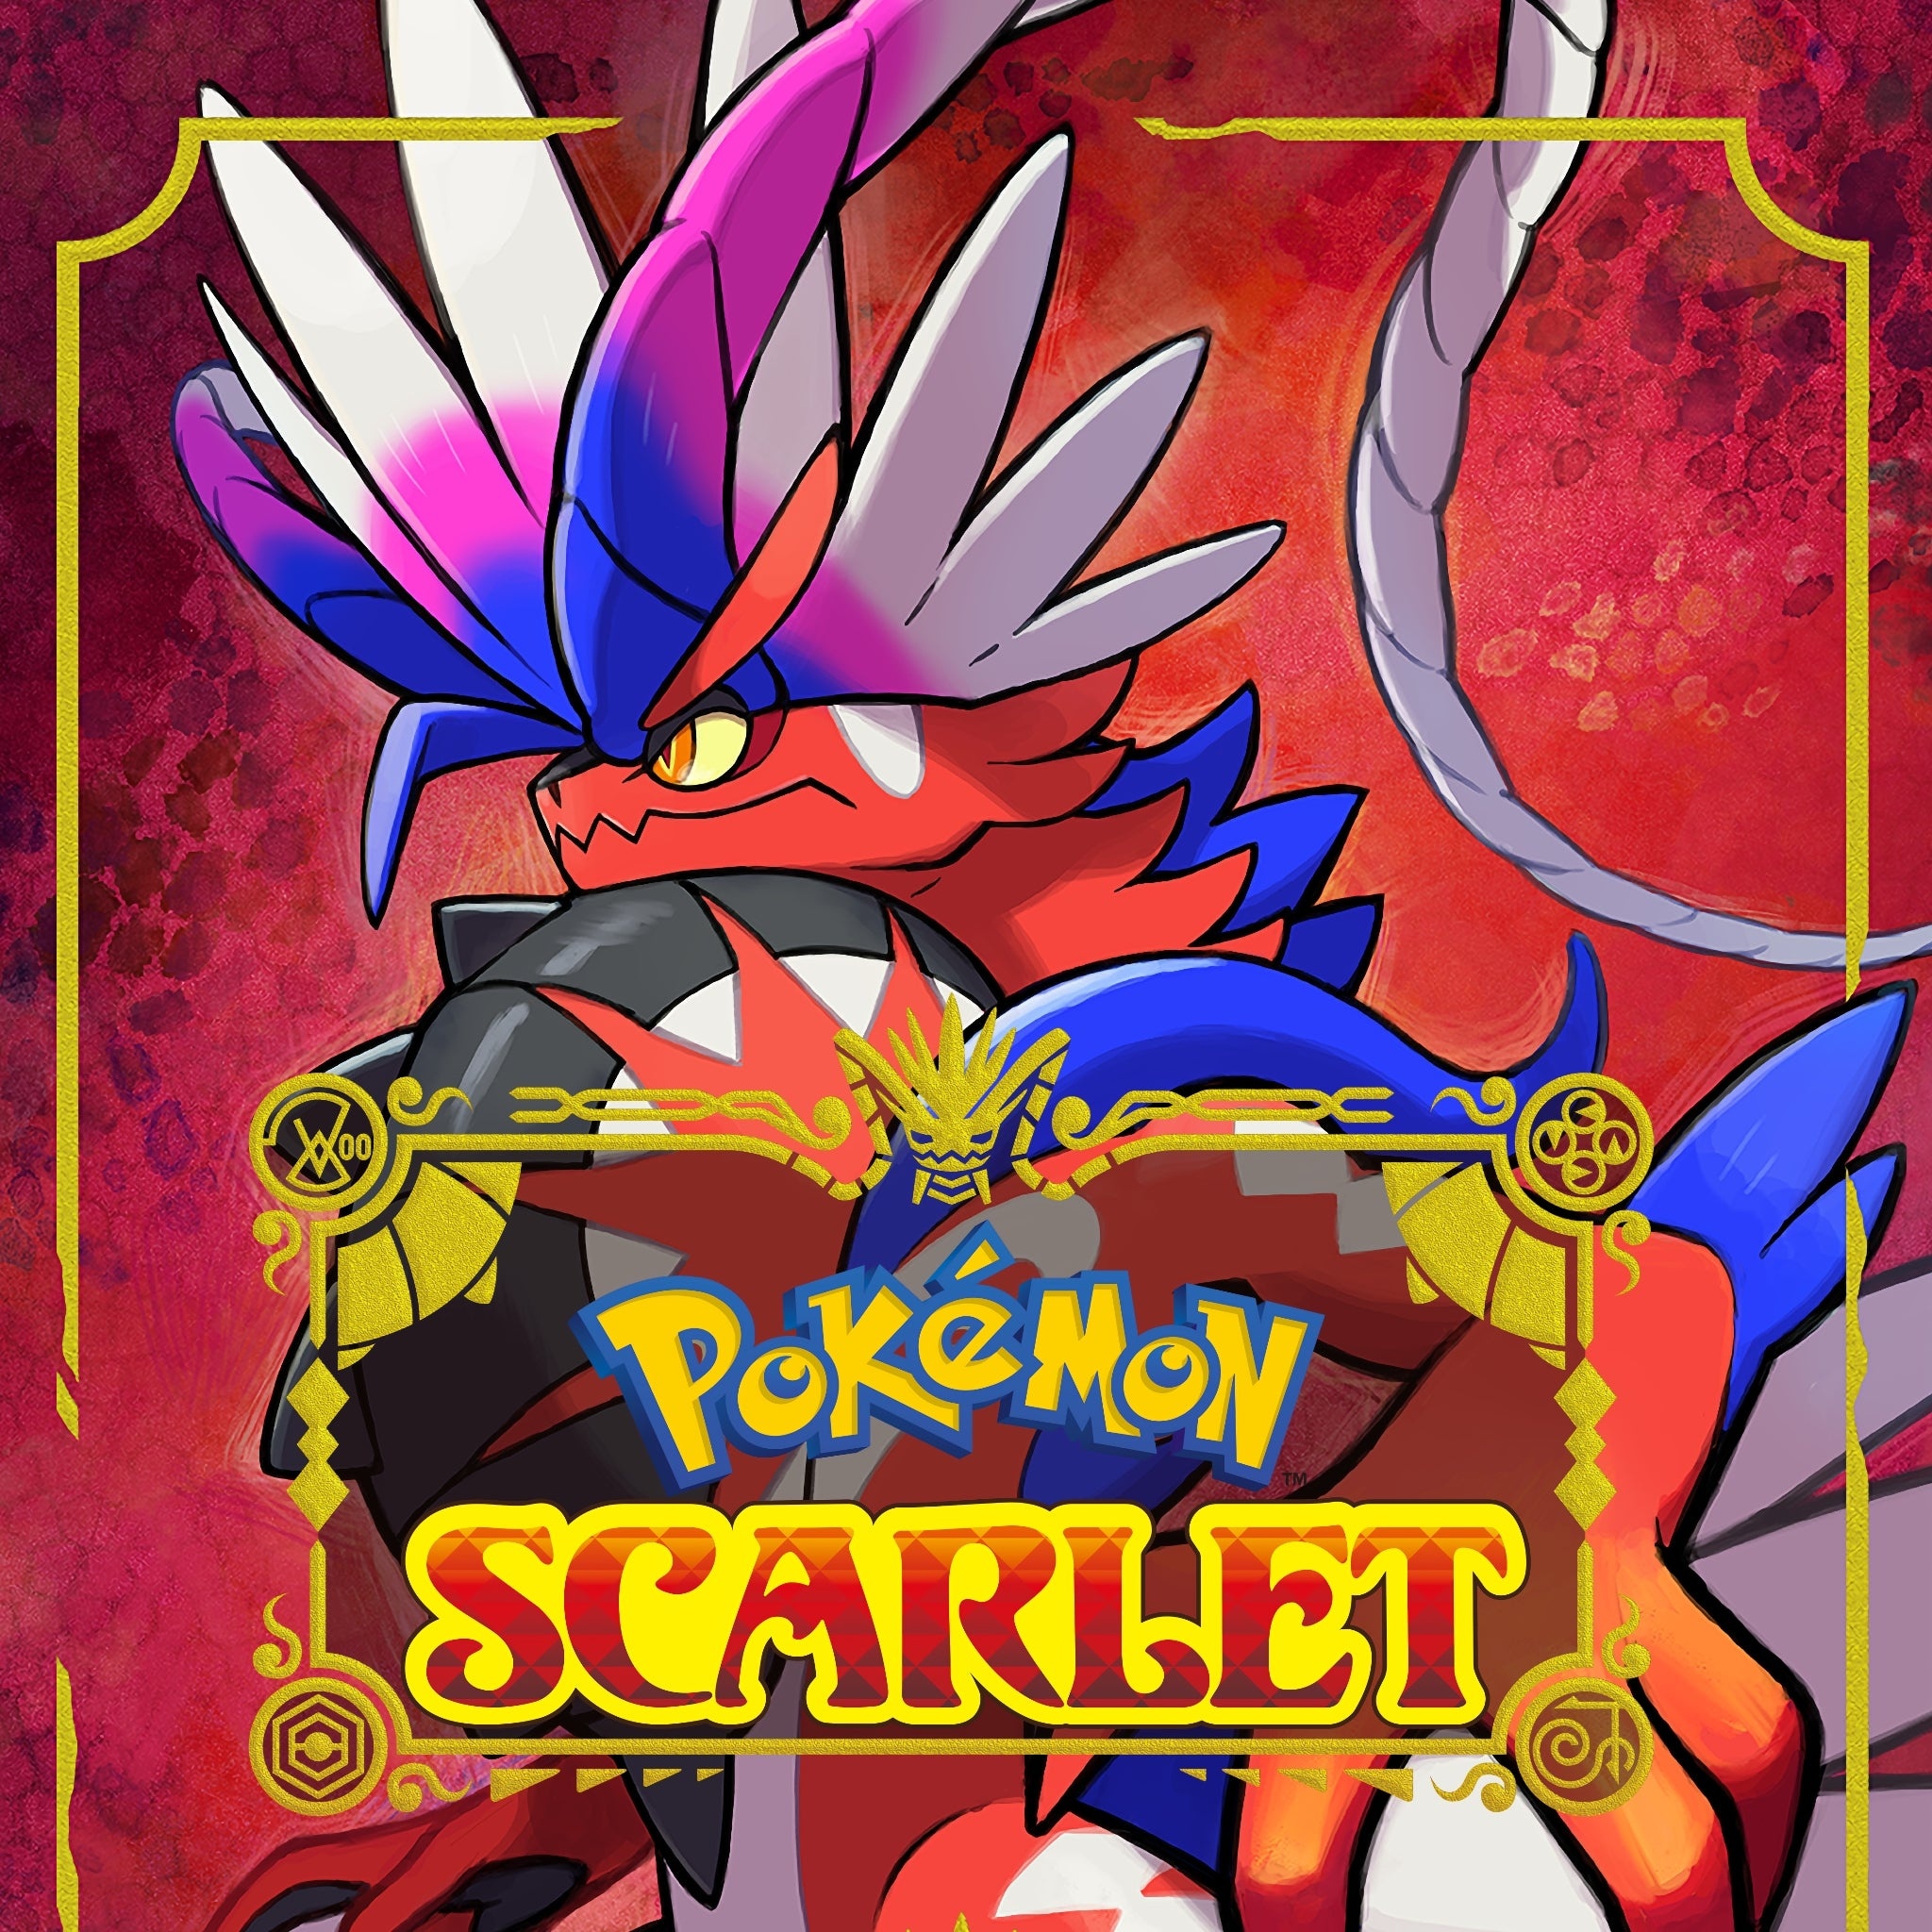 Paldea region exploration, Scarlet and Violet guide, In-game characters, Region-specific Pokmon, Strategy mapping, 2050x2050 HD Handy